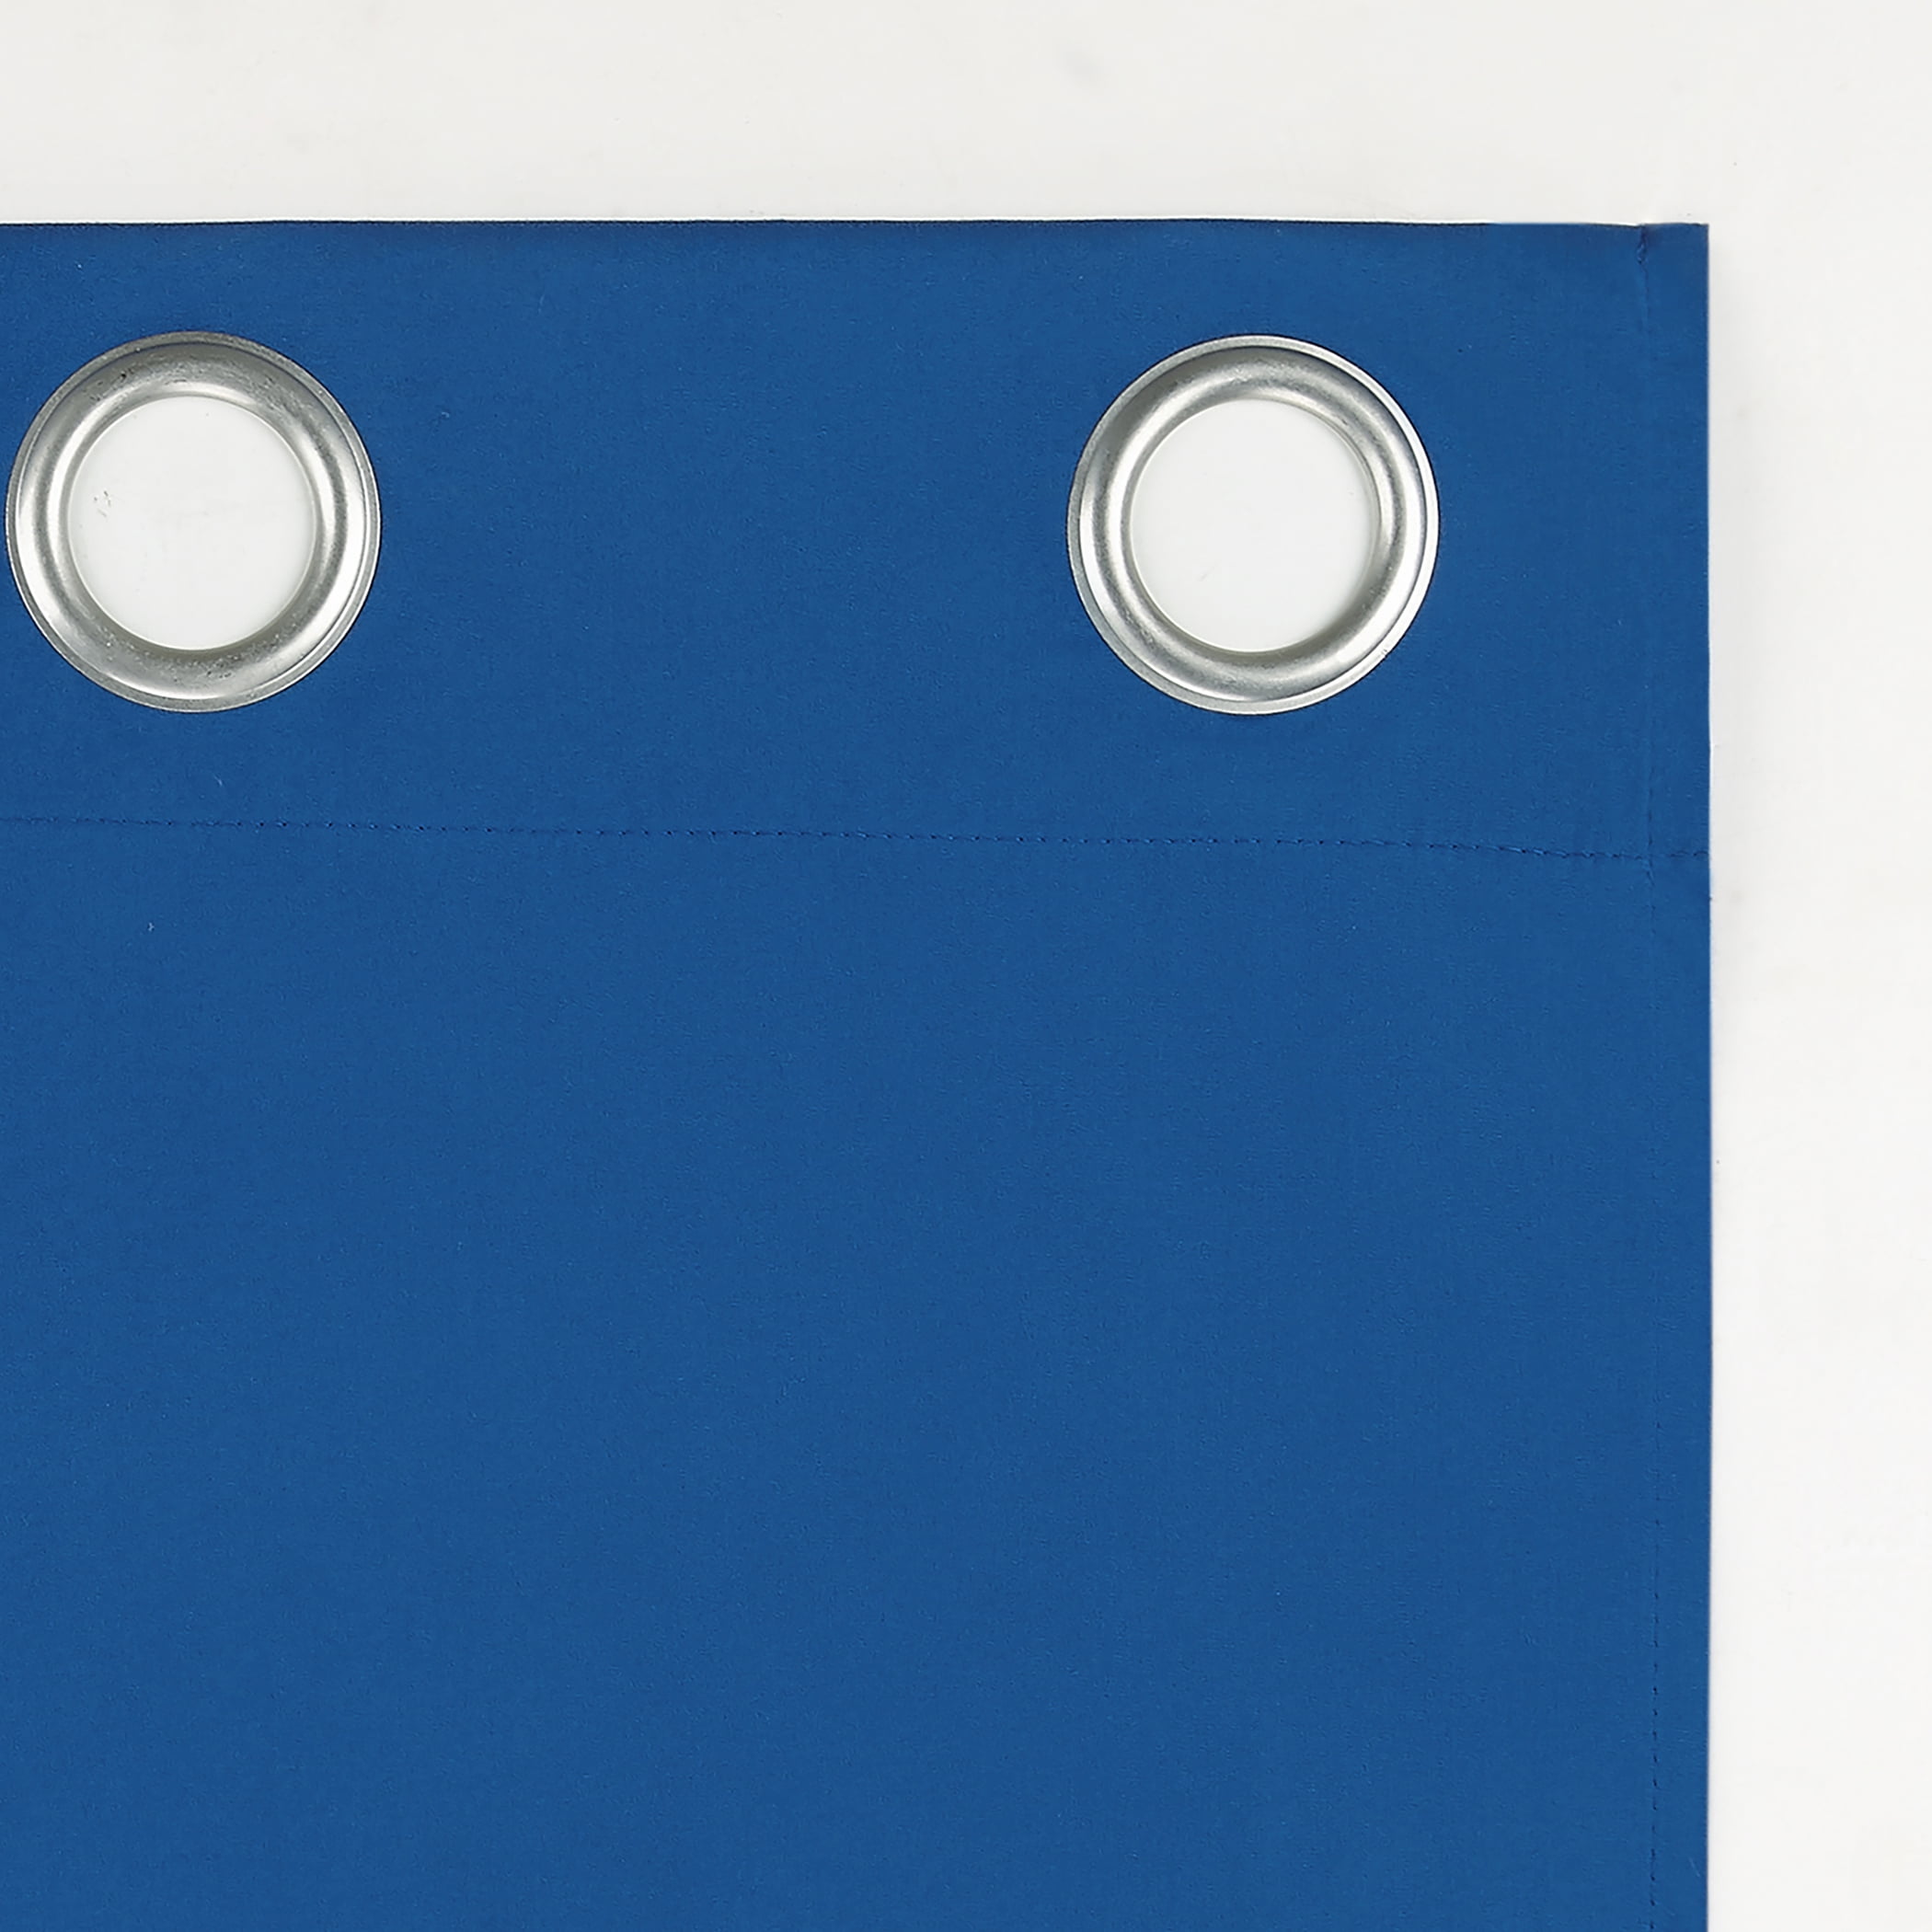 Blackout Light Cover, Blue Vinyl by Southpaw